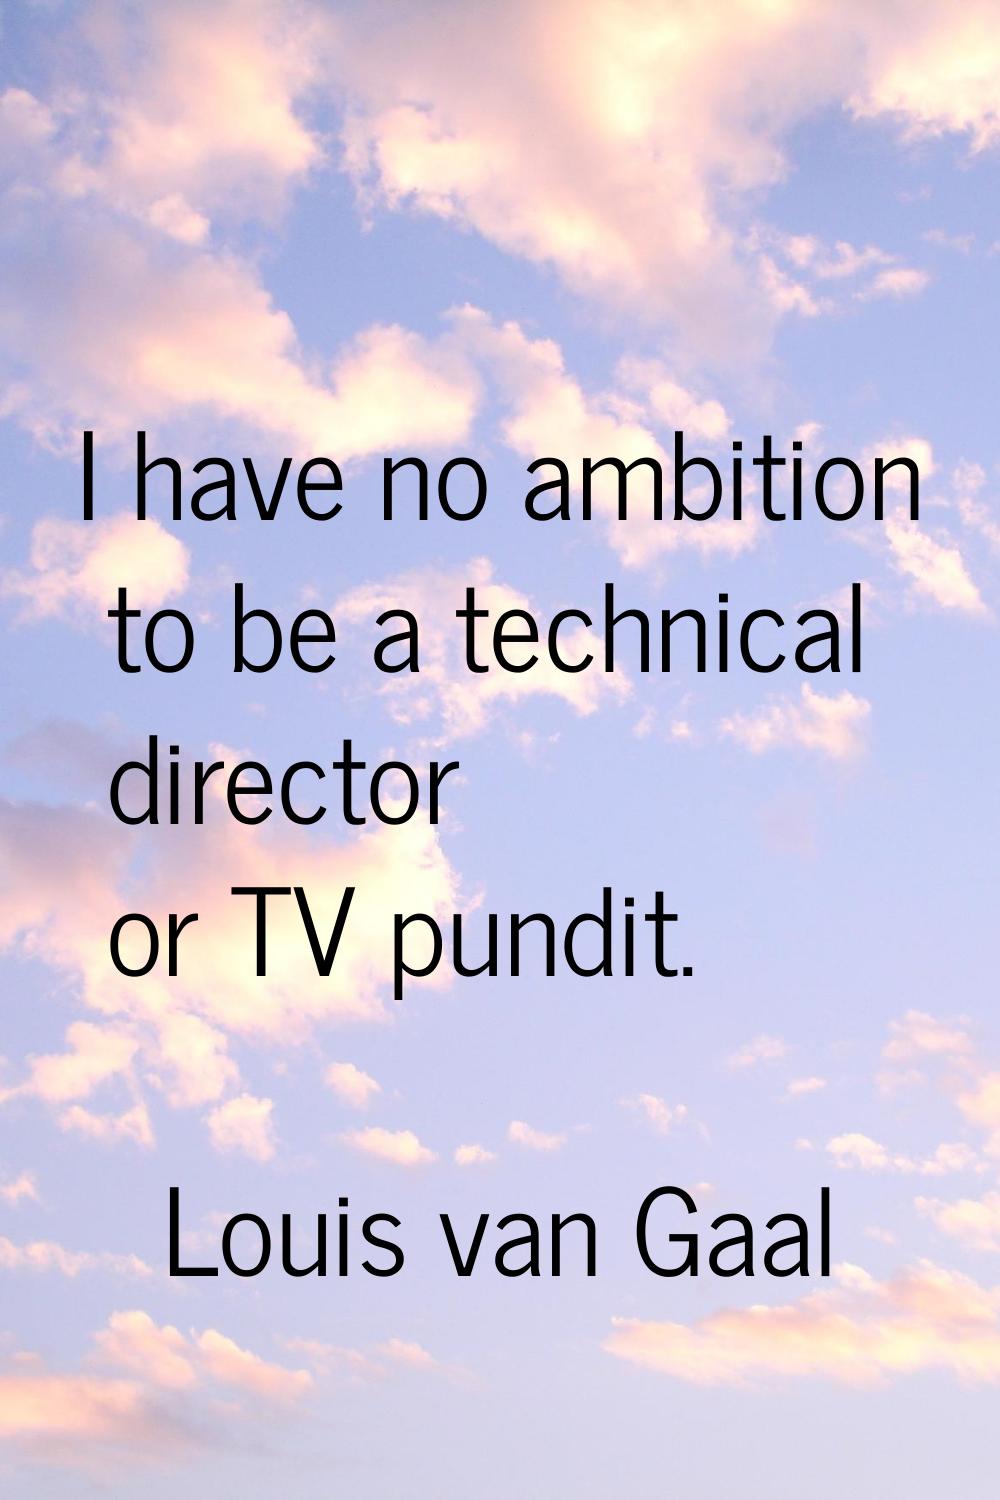 I have no ambition to be a technical director or TV pundit.